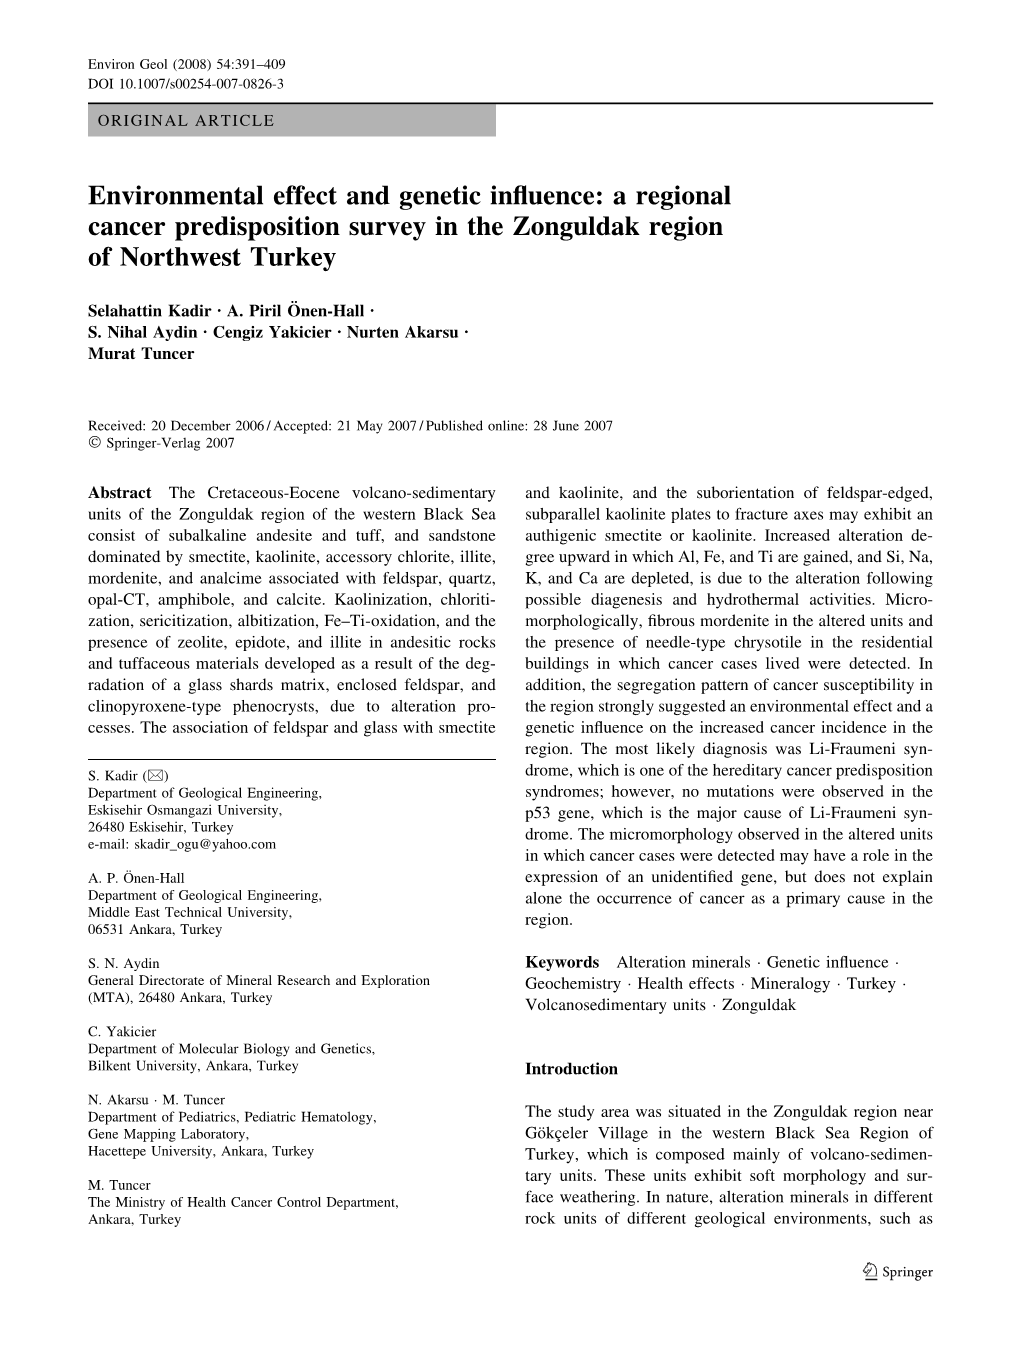 Environmental Effect and Genetic Influence: a Regional Cancer